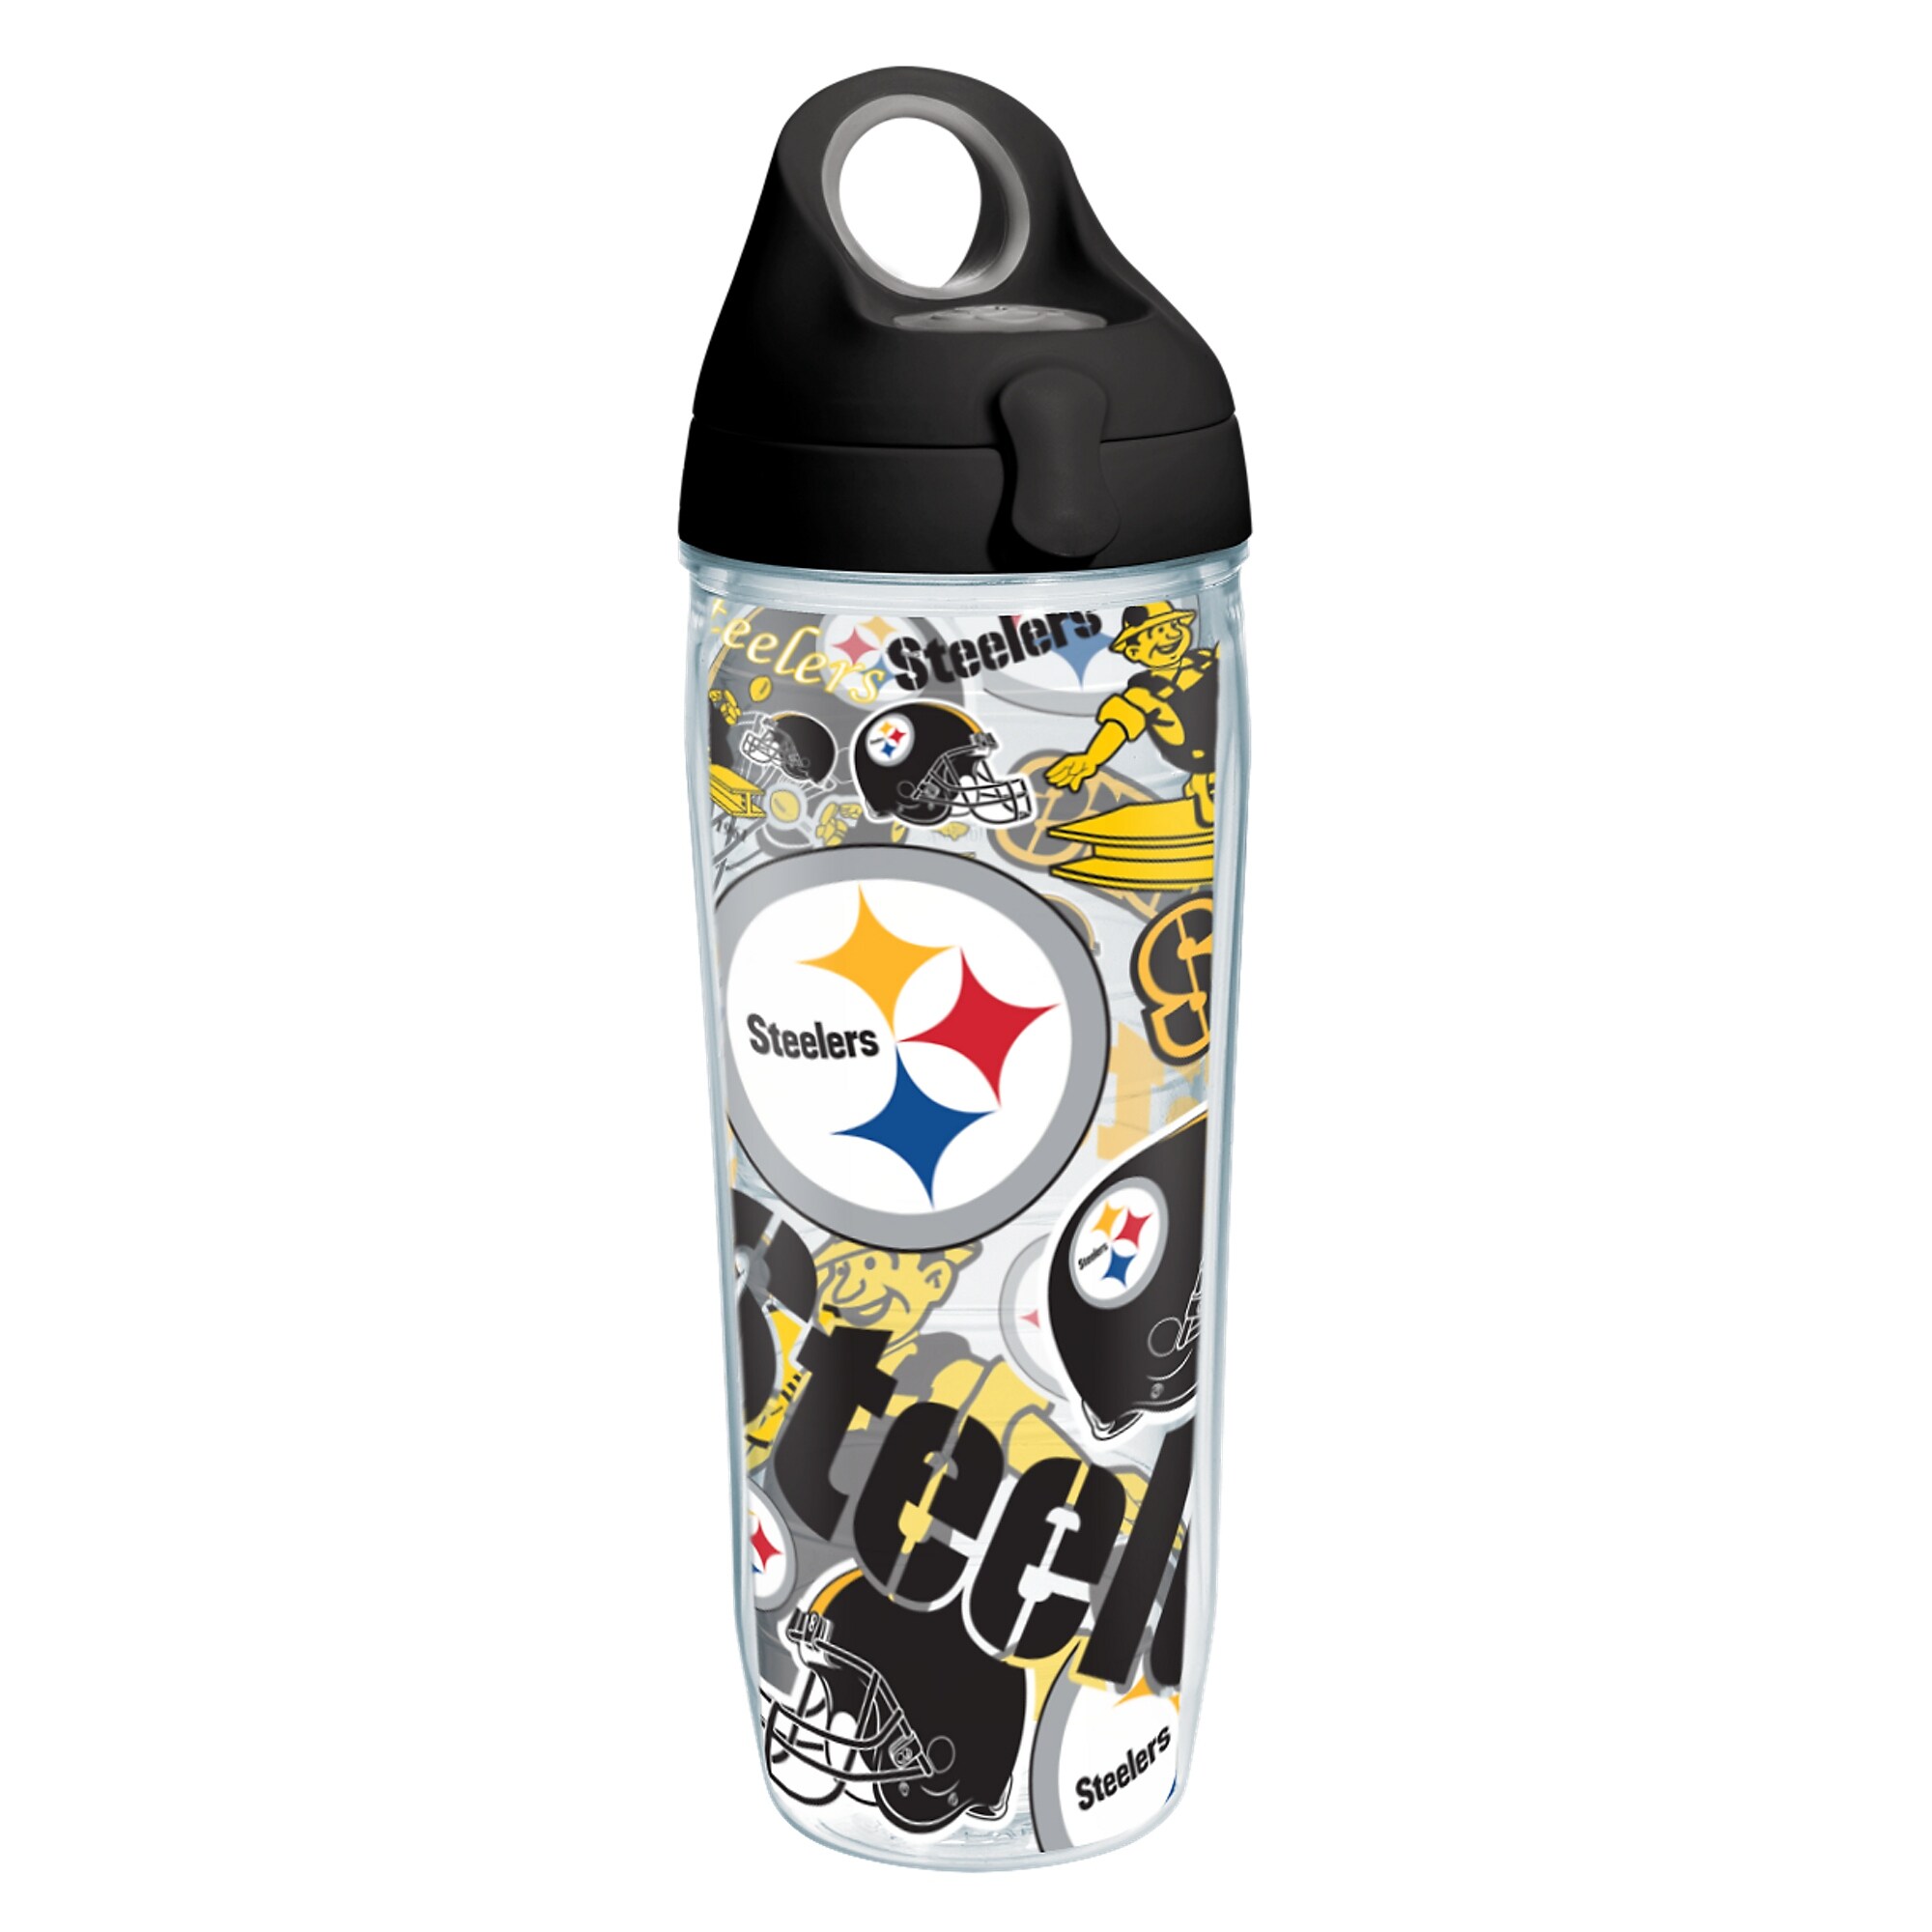 https://ak1.ostkcdn.com/images/products/is/images/direct/06ee44e1bb38b5c9dd9a0bf8f7f4377beea94ace/NFL-Pittsburgh-Steelers-All-Over-24-oz-Water-Bottle-with-lid.jpg